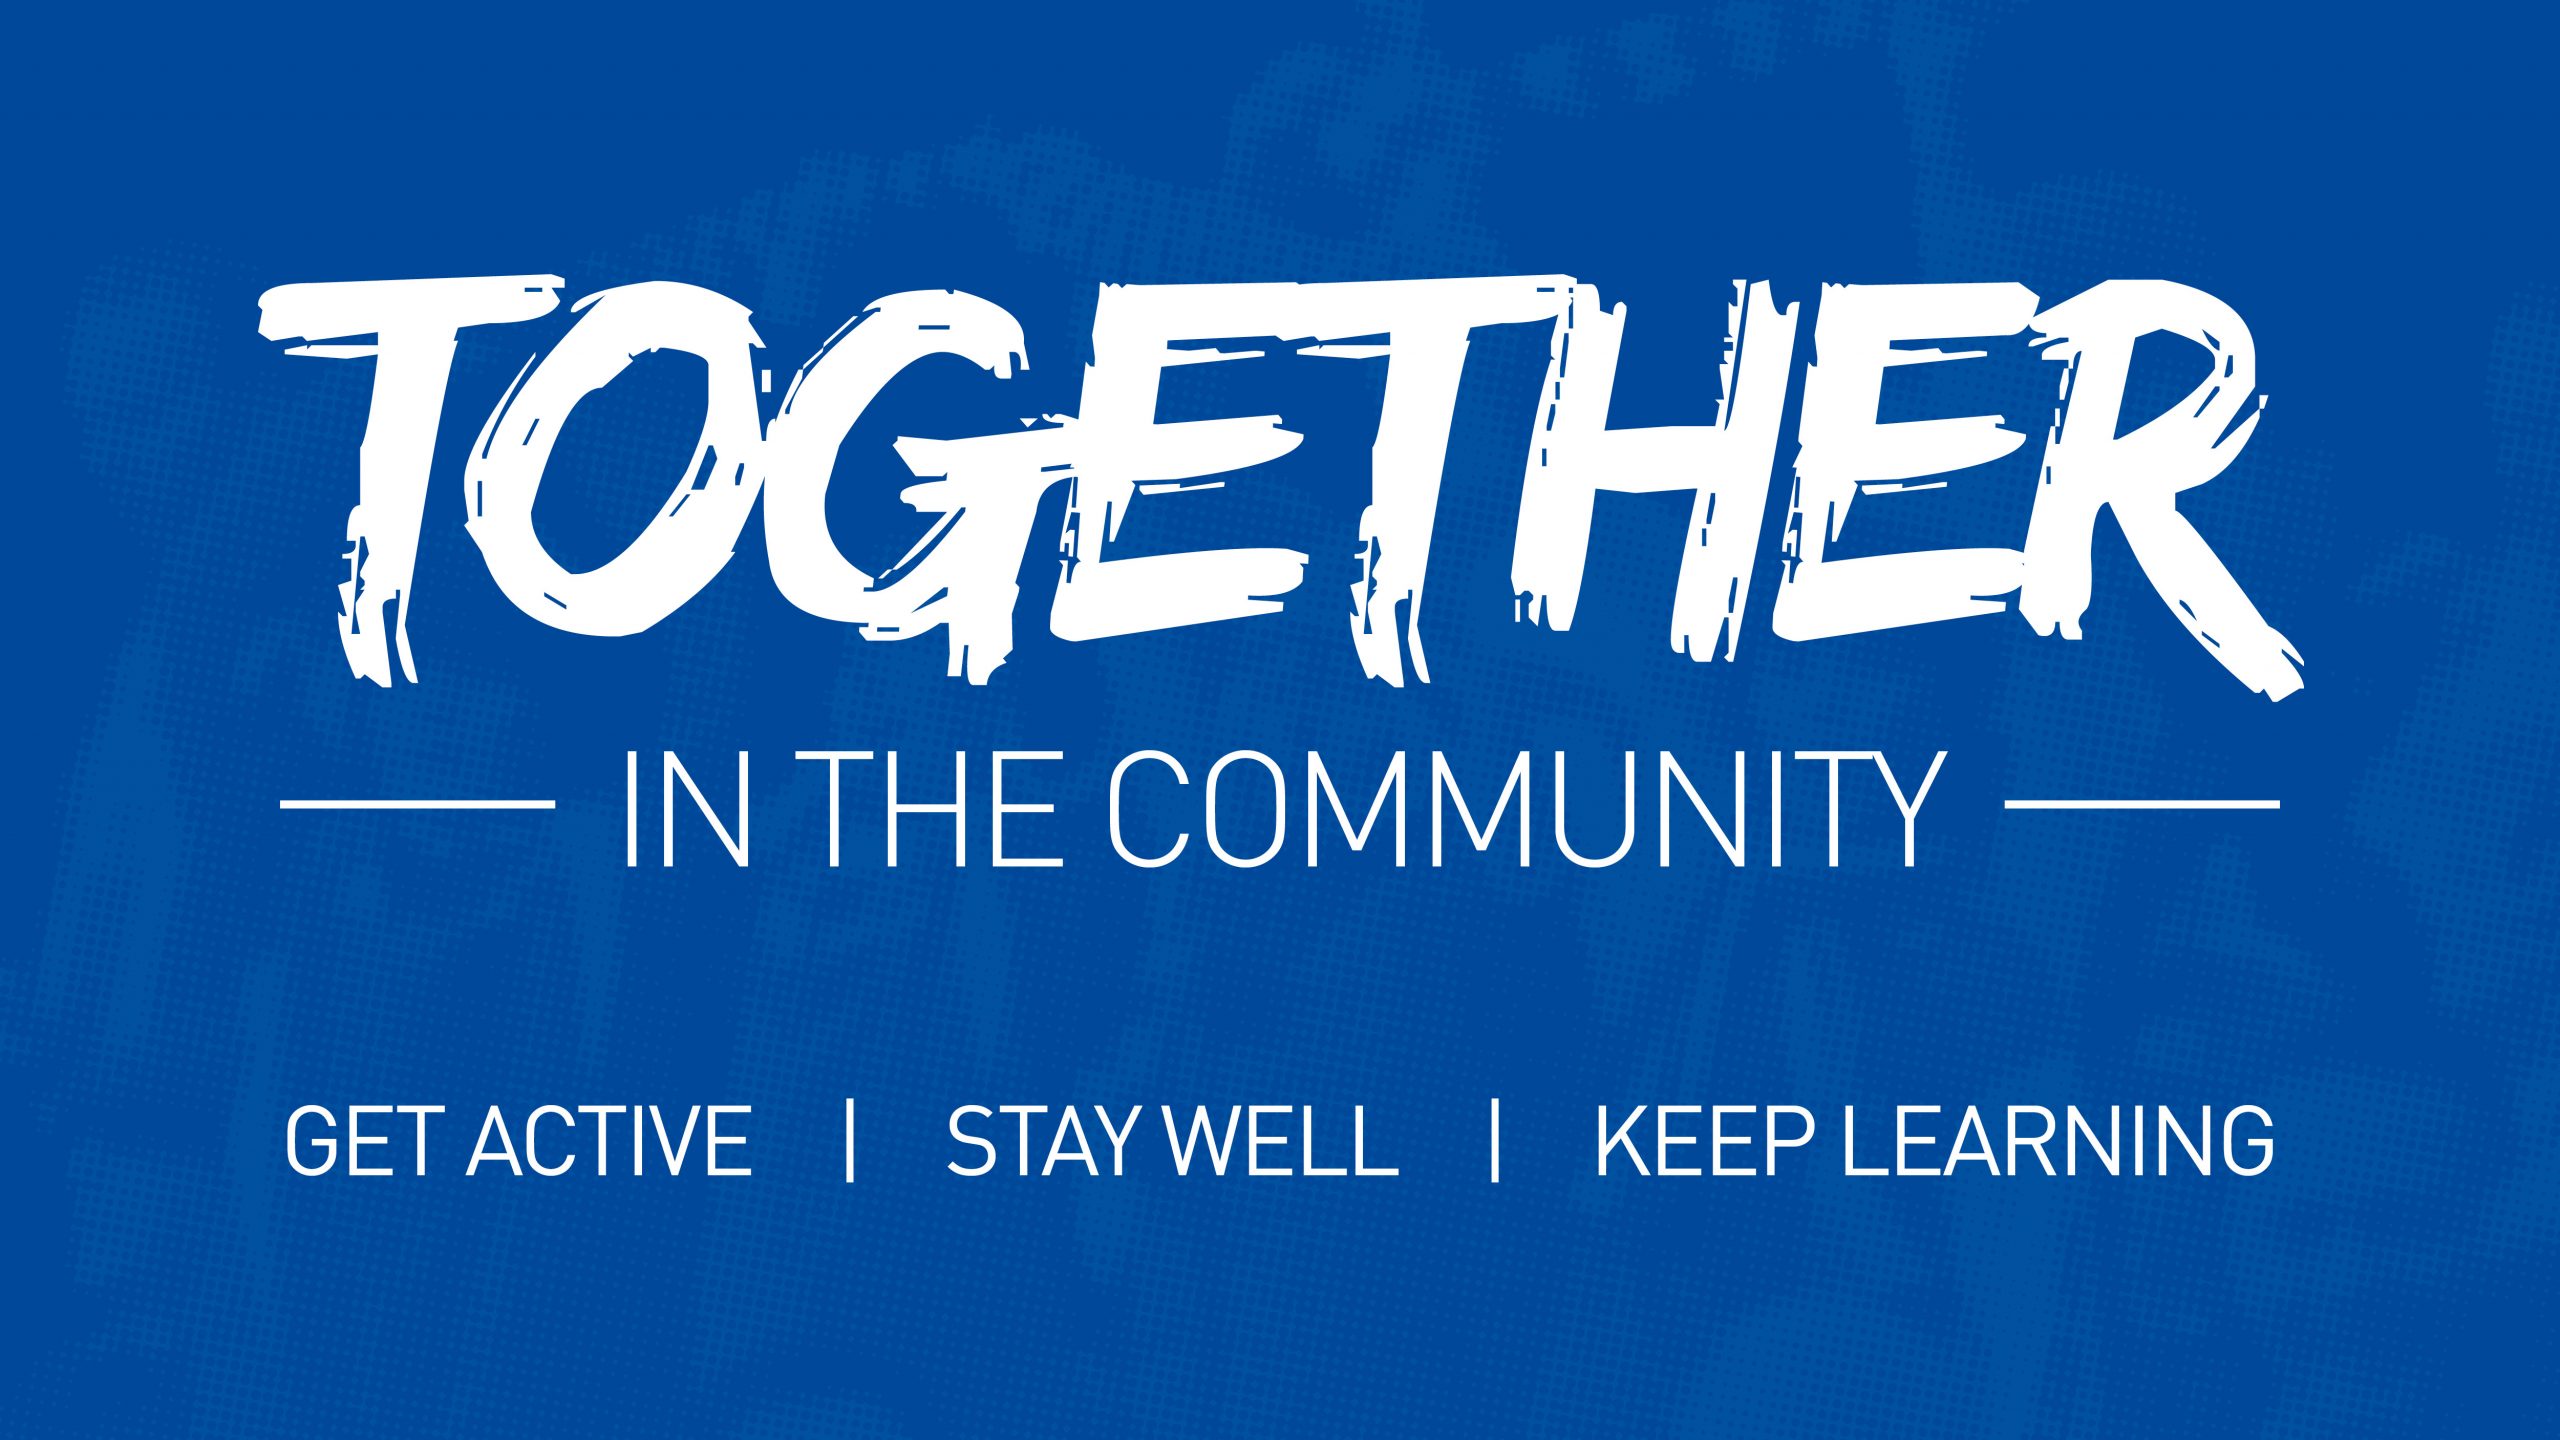 Together in the Community campaign launched